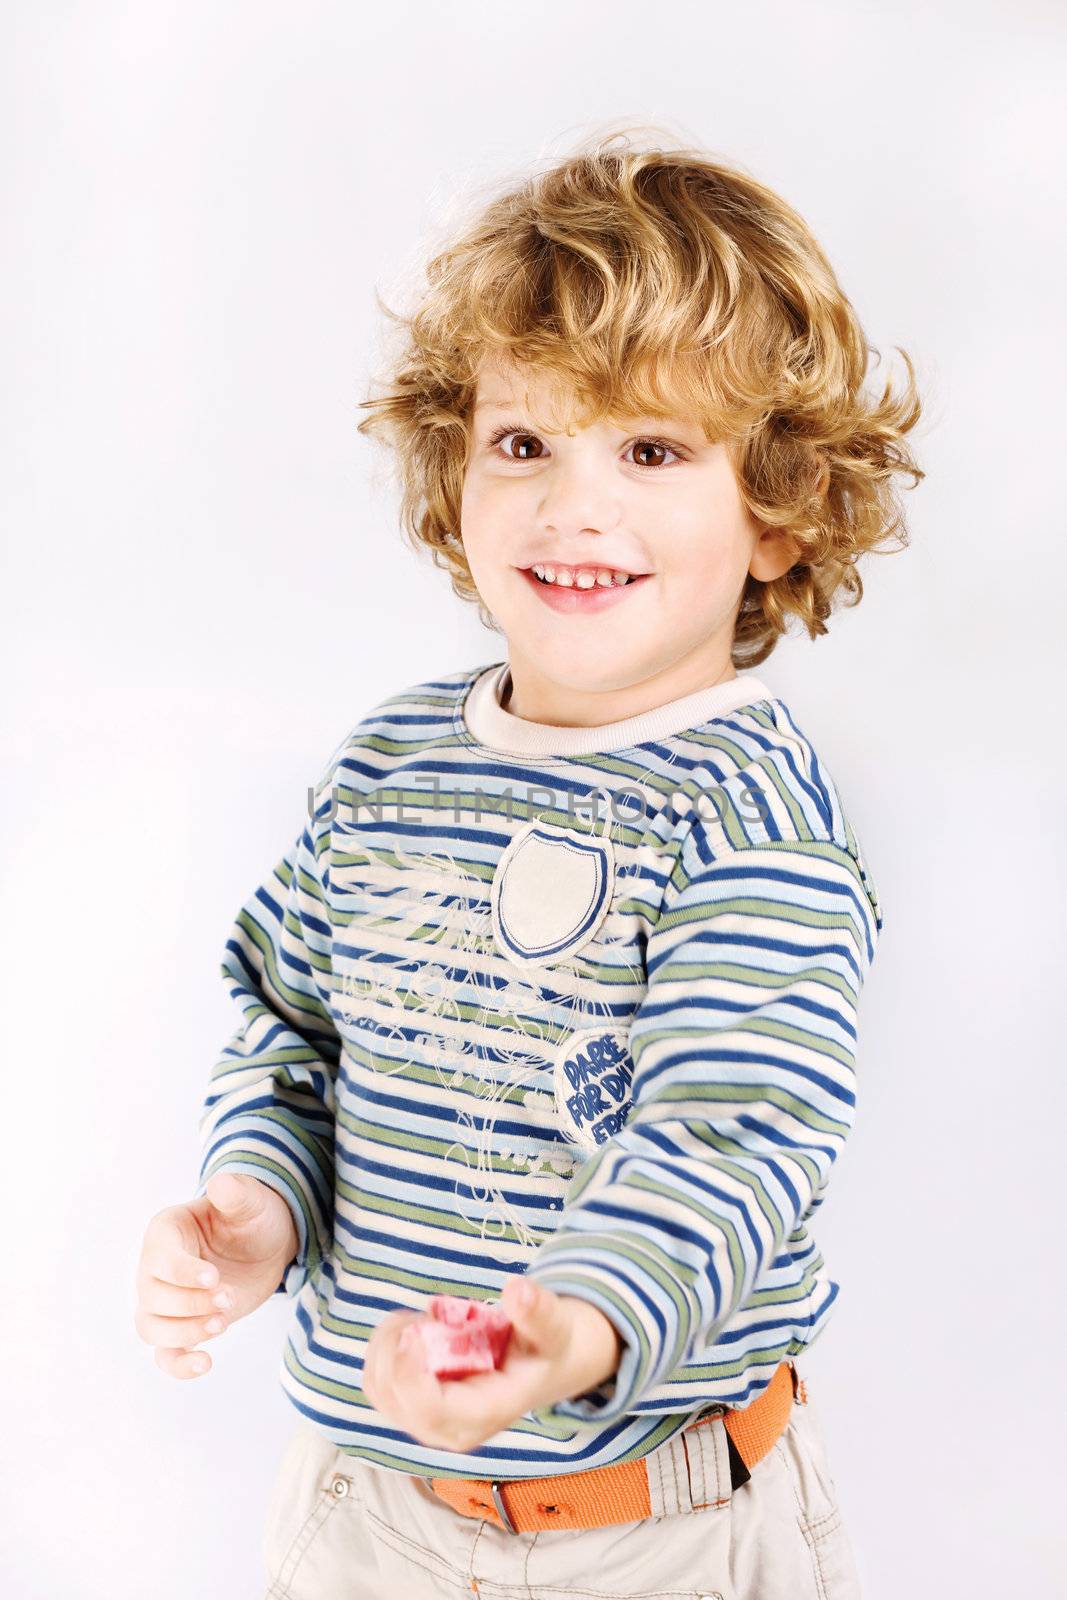 Boy holding candy in one hand